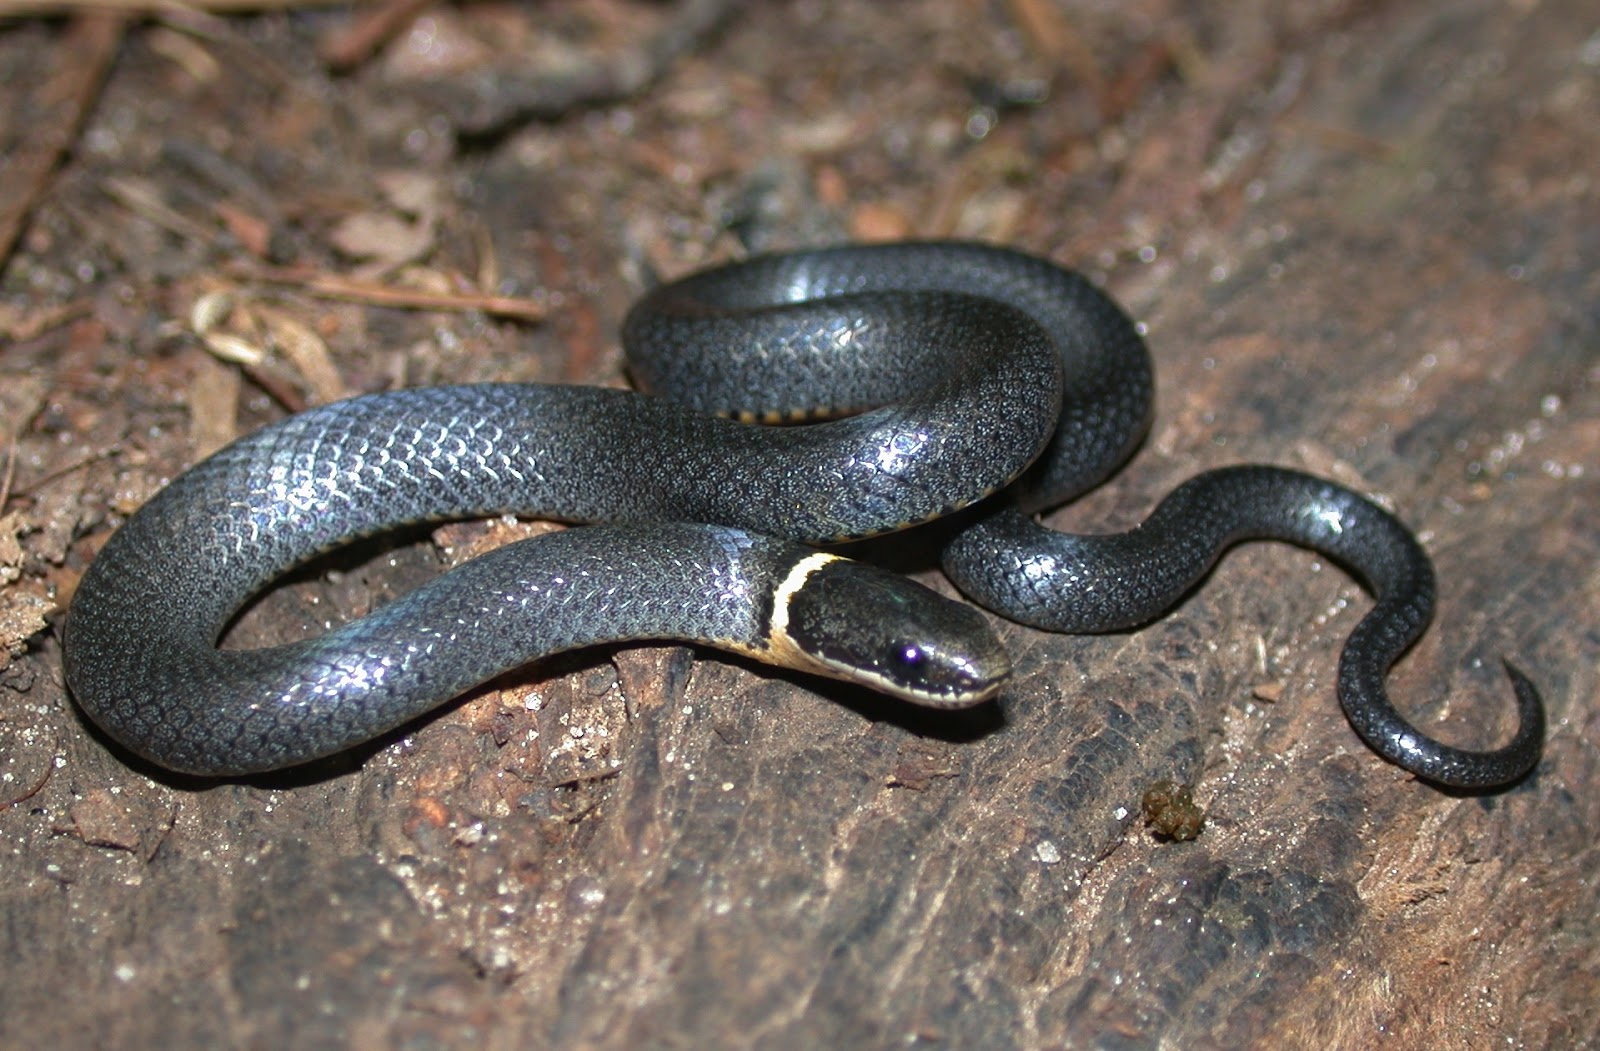 Black Snakes With Yellow Ring Around Neck
